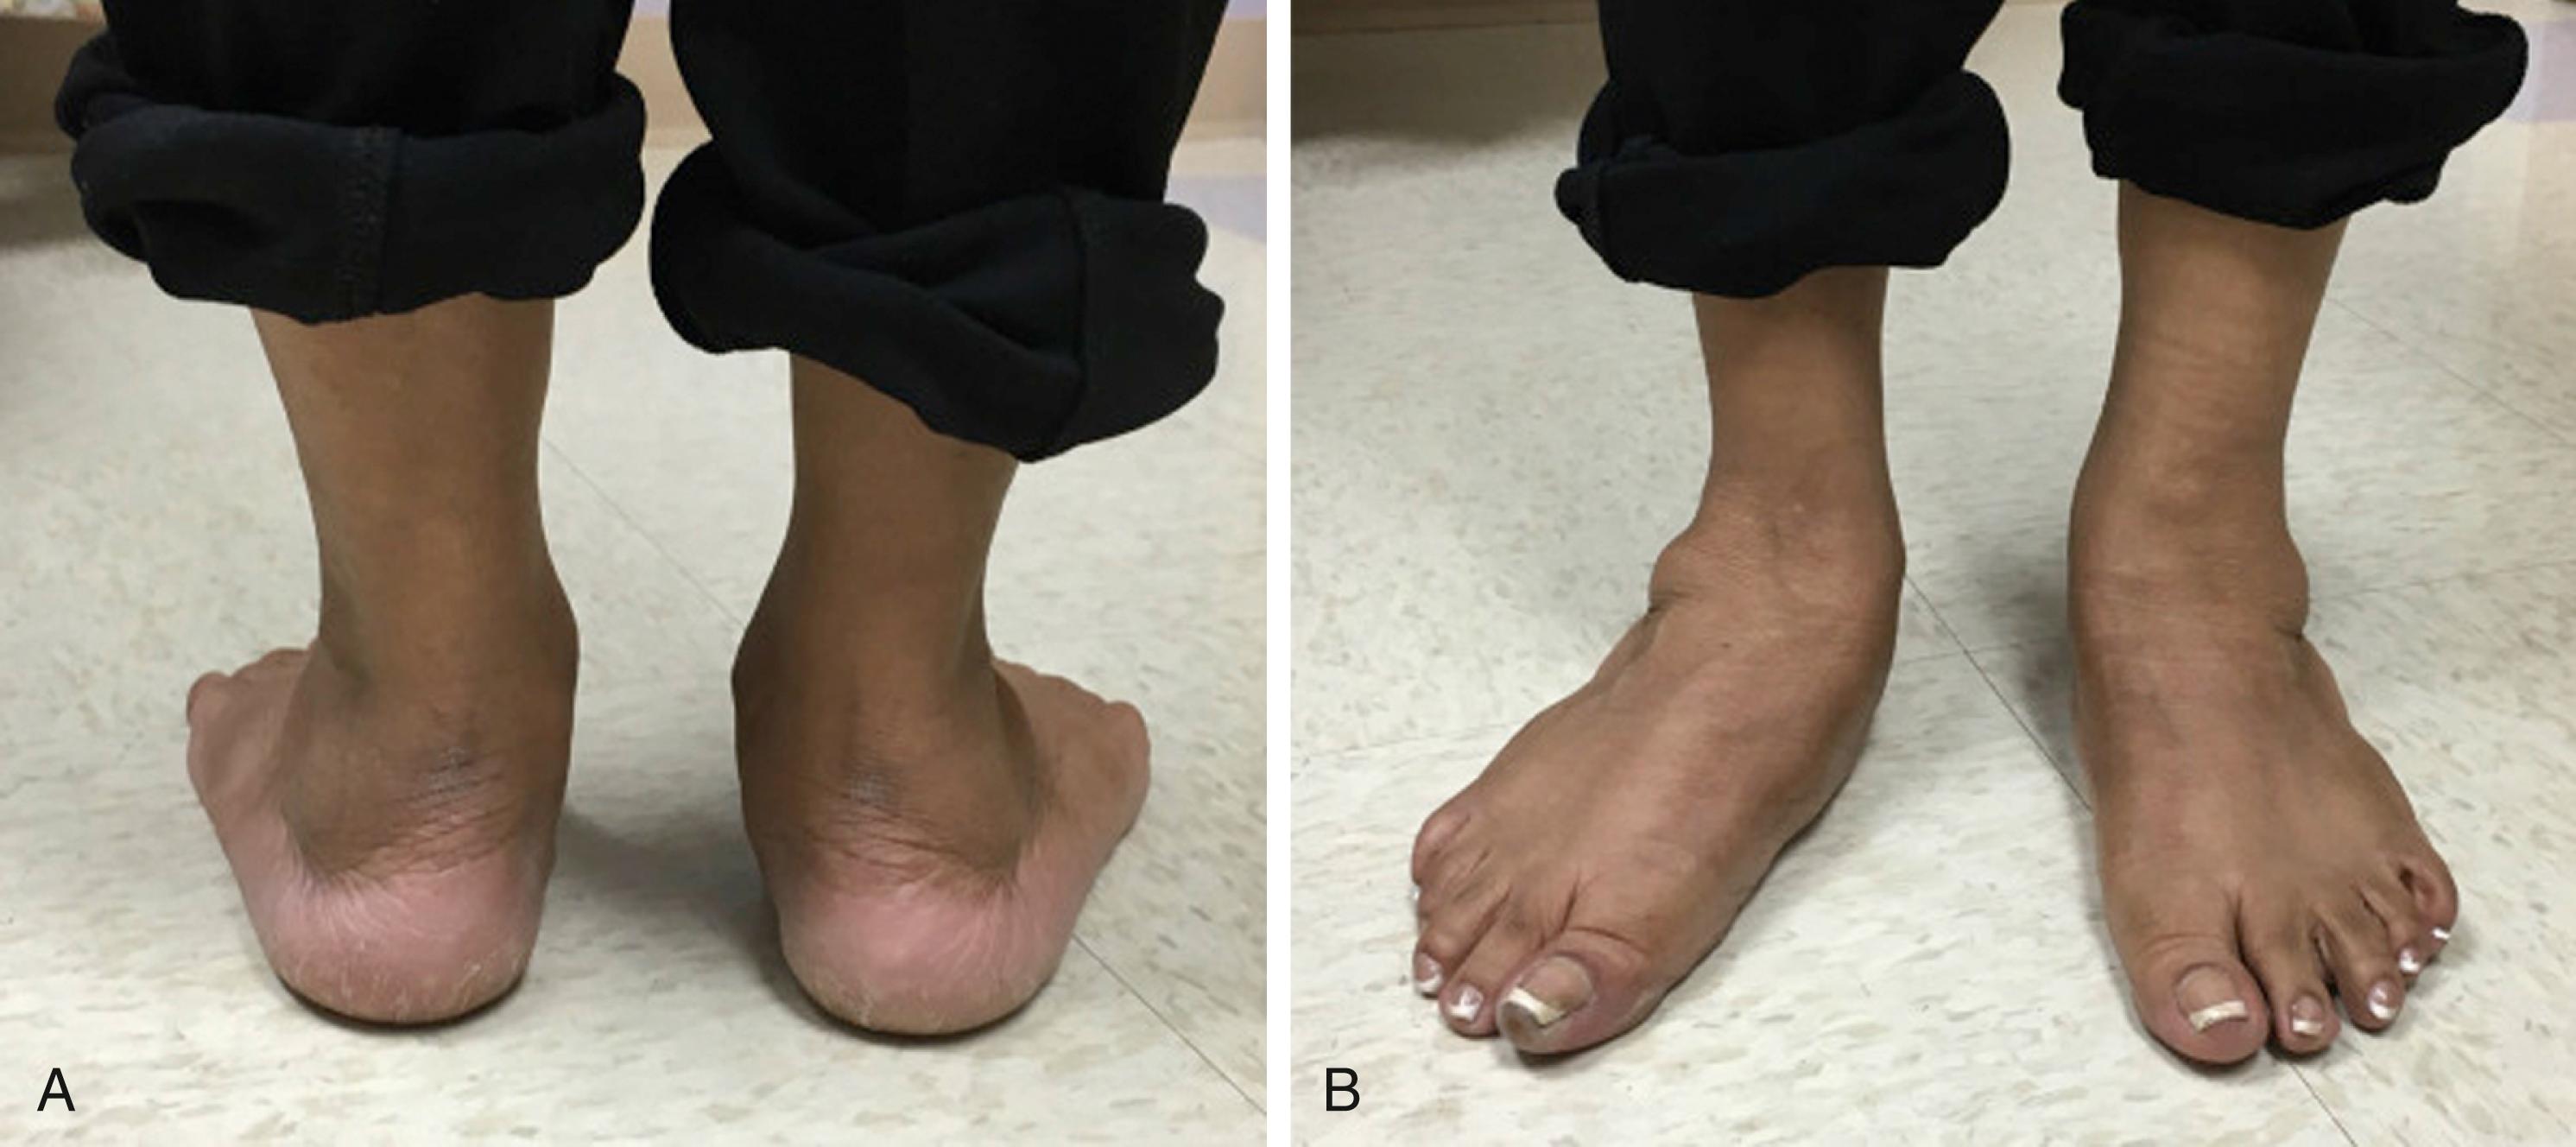 FIG. 192.5, View from (A) posterior and (B) anterior. The positive “too many toes” sign in the posterior tibialis dysfunctional right foot is appreciated when examining the weight-bearing patient from behind. The forefoot is abducted/pronated and the hindfoot is in greater valgus, resulting in more toes seen laterally in the right foot when compared with the left.